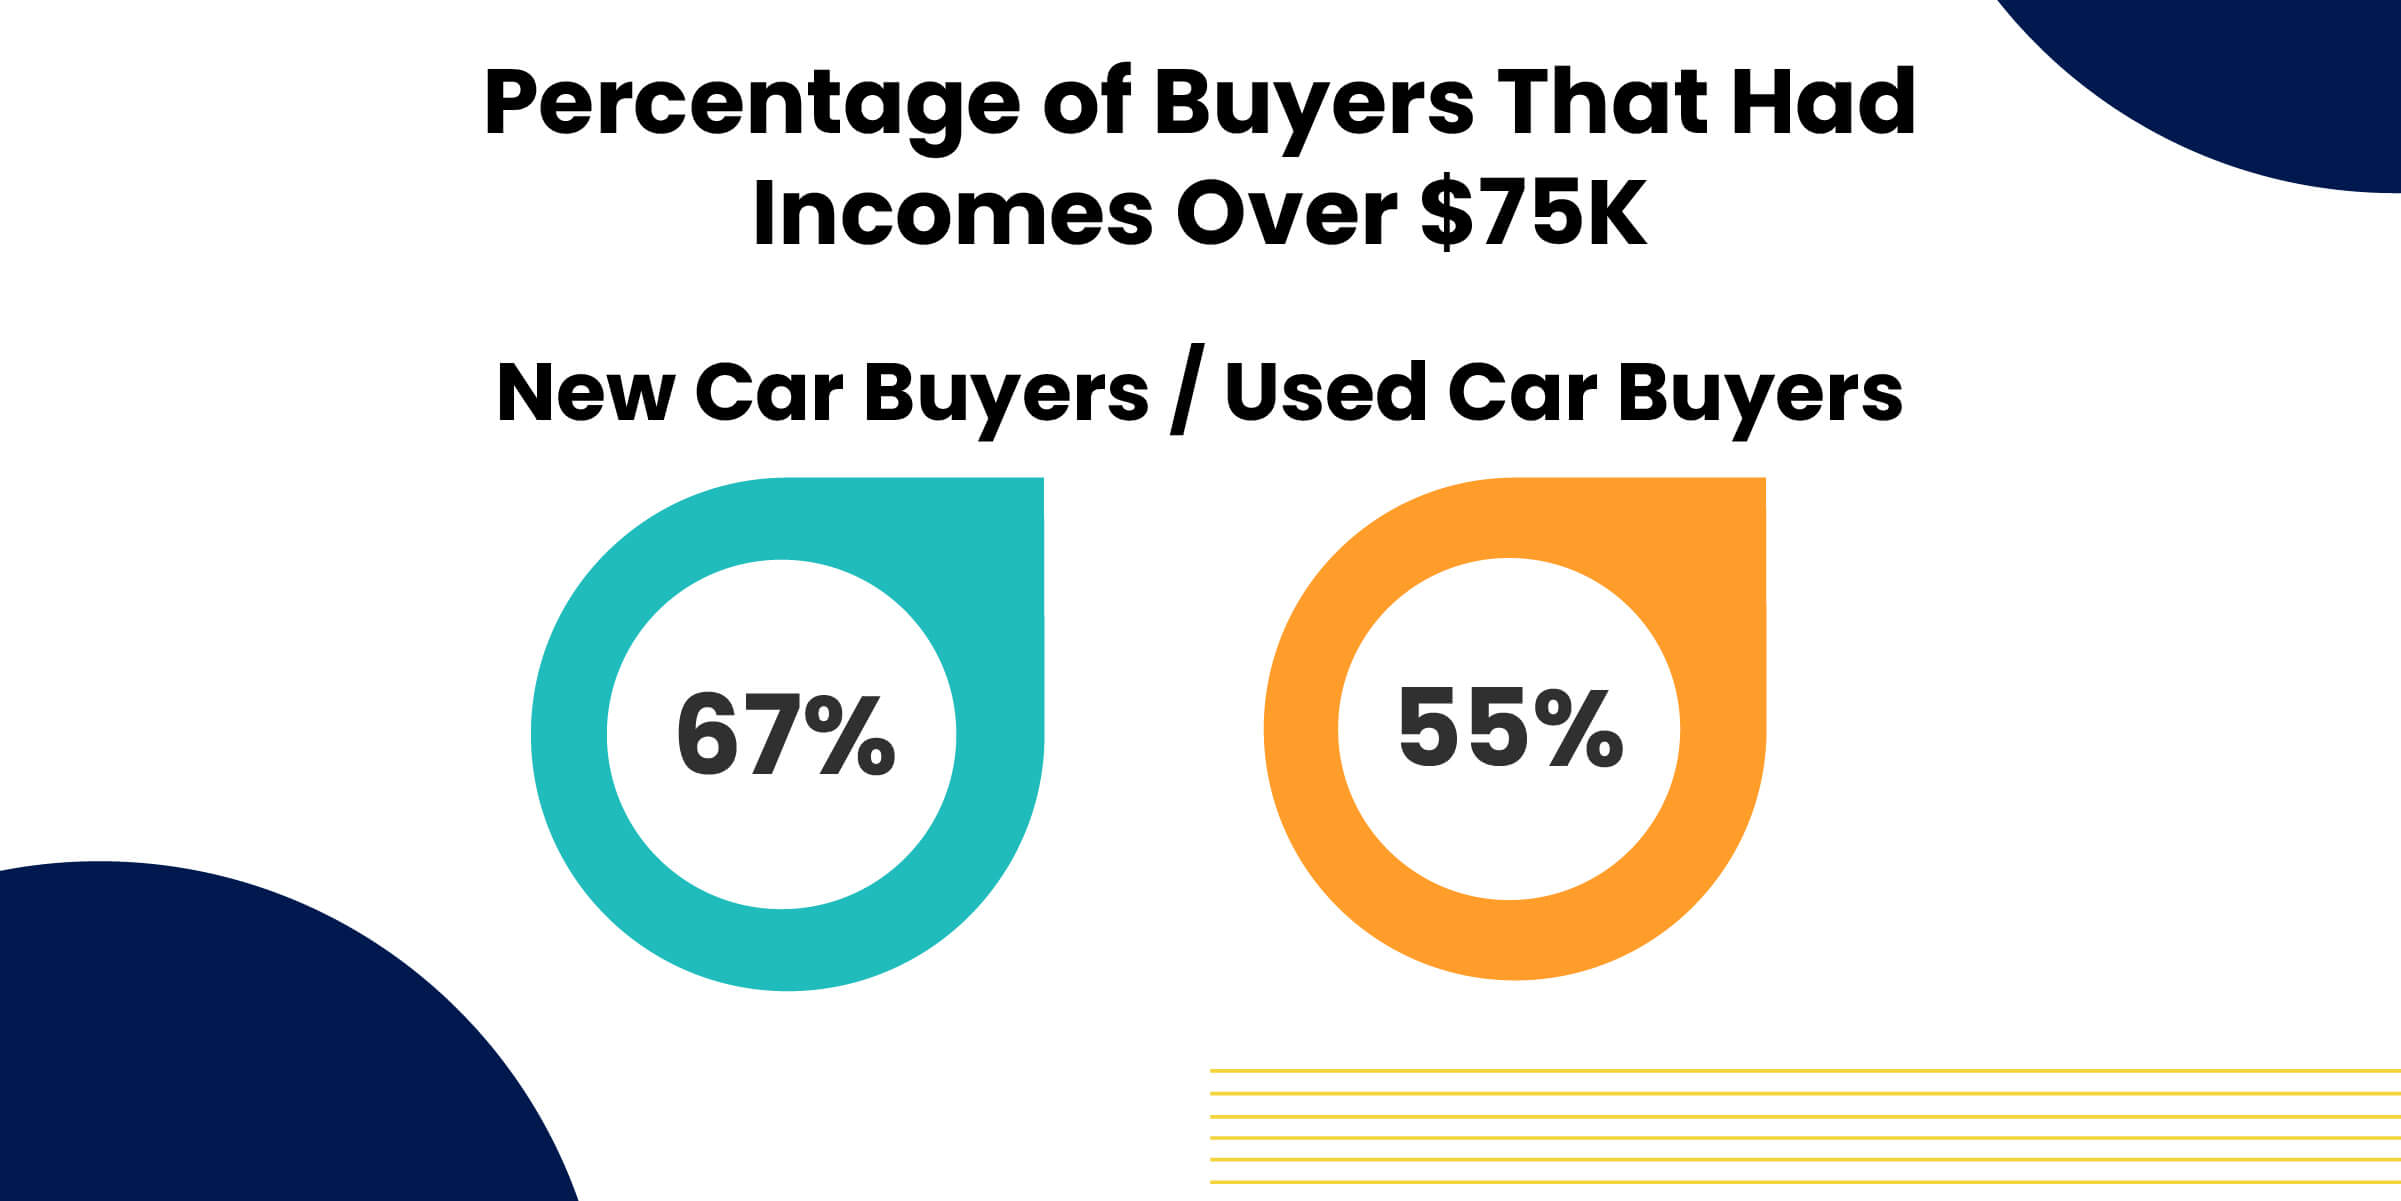 Percentage of Buyers That Had Incomes Over 75